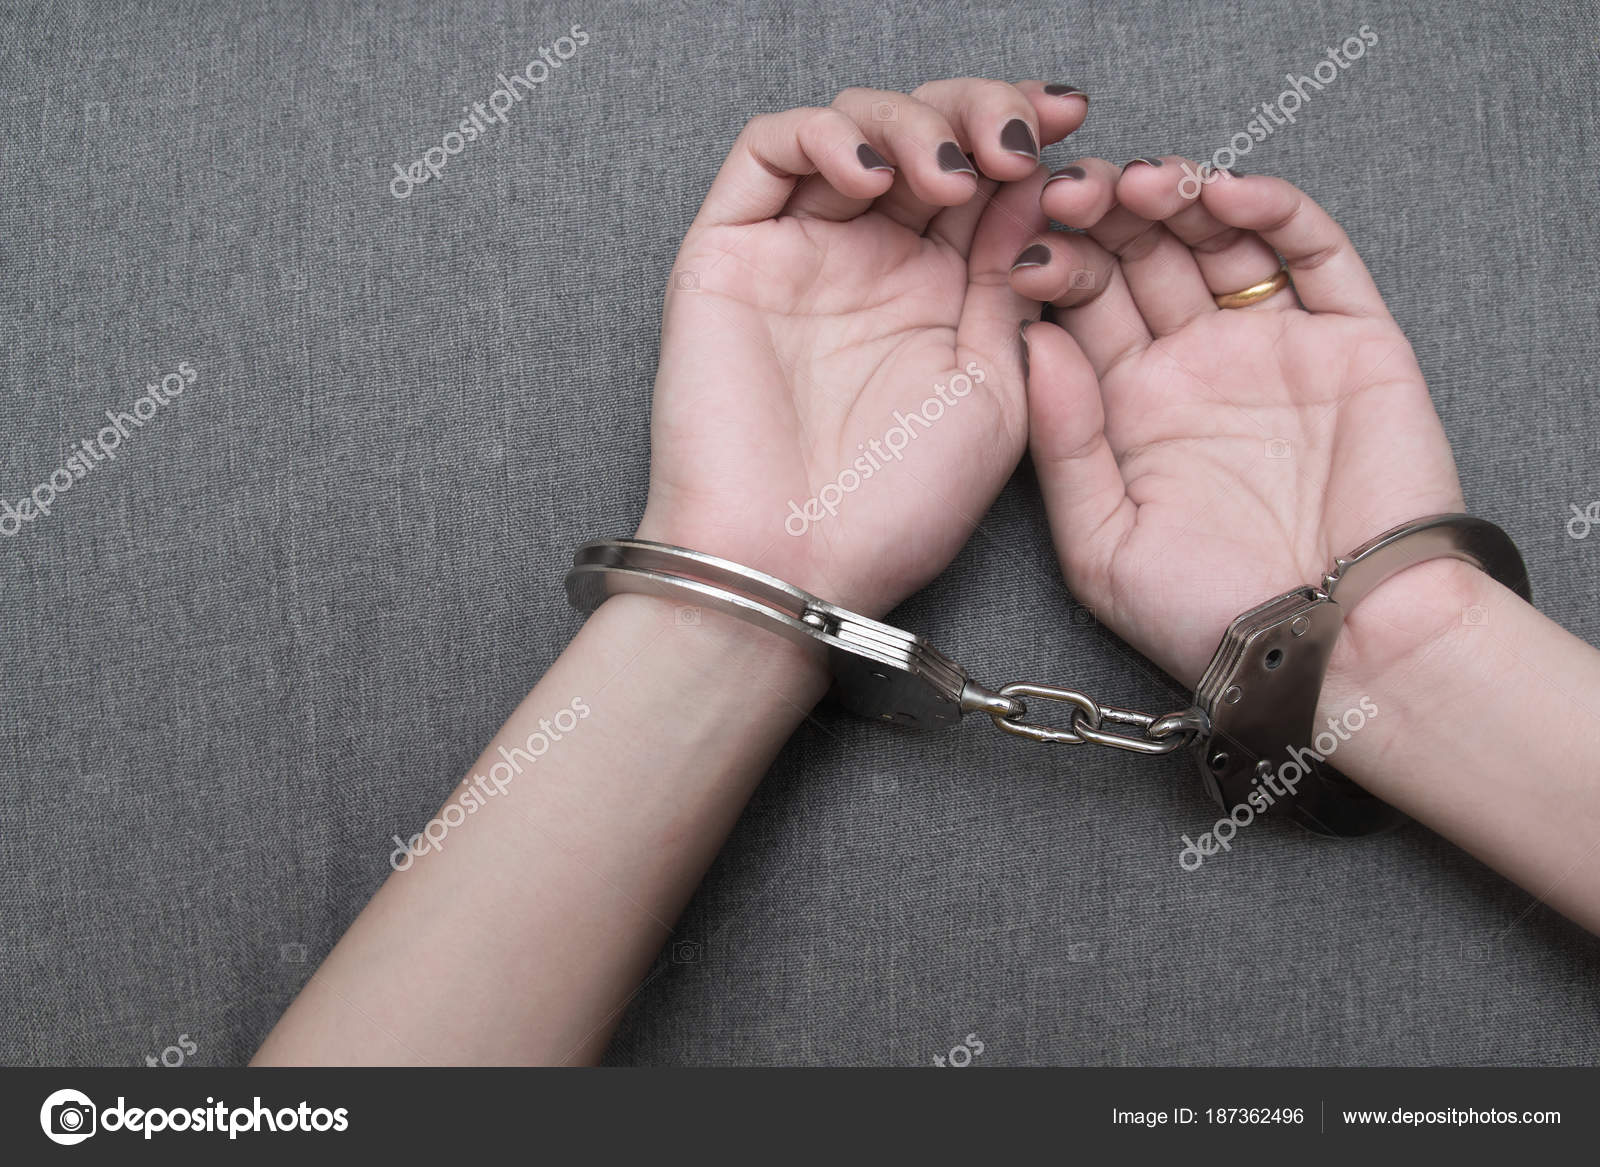 Sexy Girl Handcuffed Arrested Sexy Girl Handcuffed Arrested Sexy Girl Handcuffed Arrested Sexy Girl